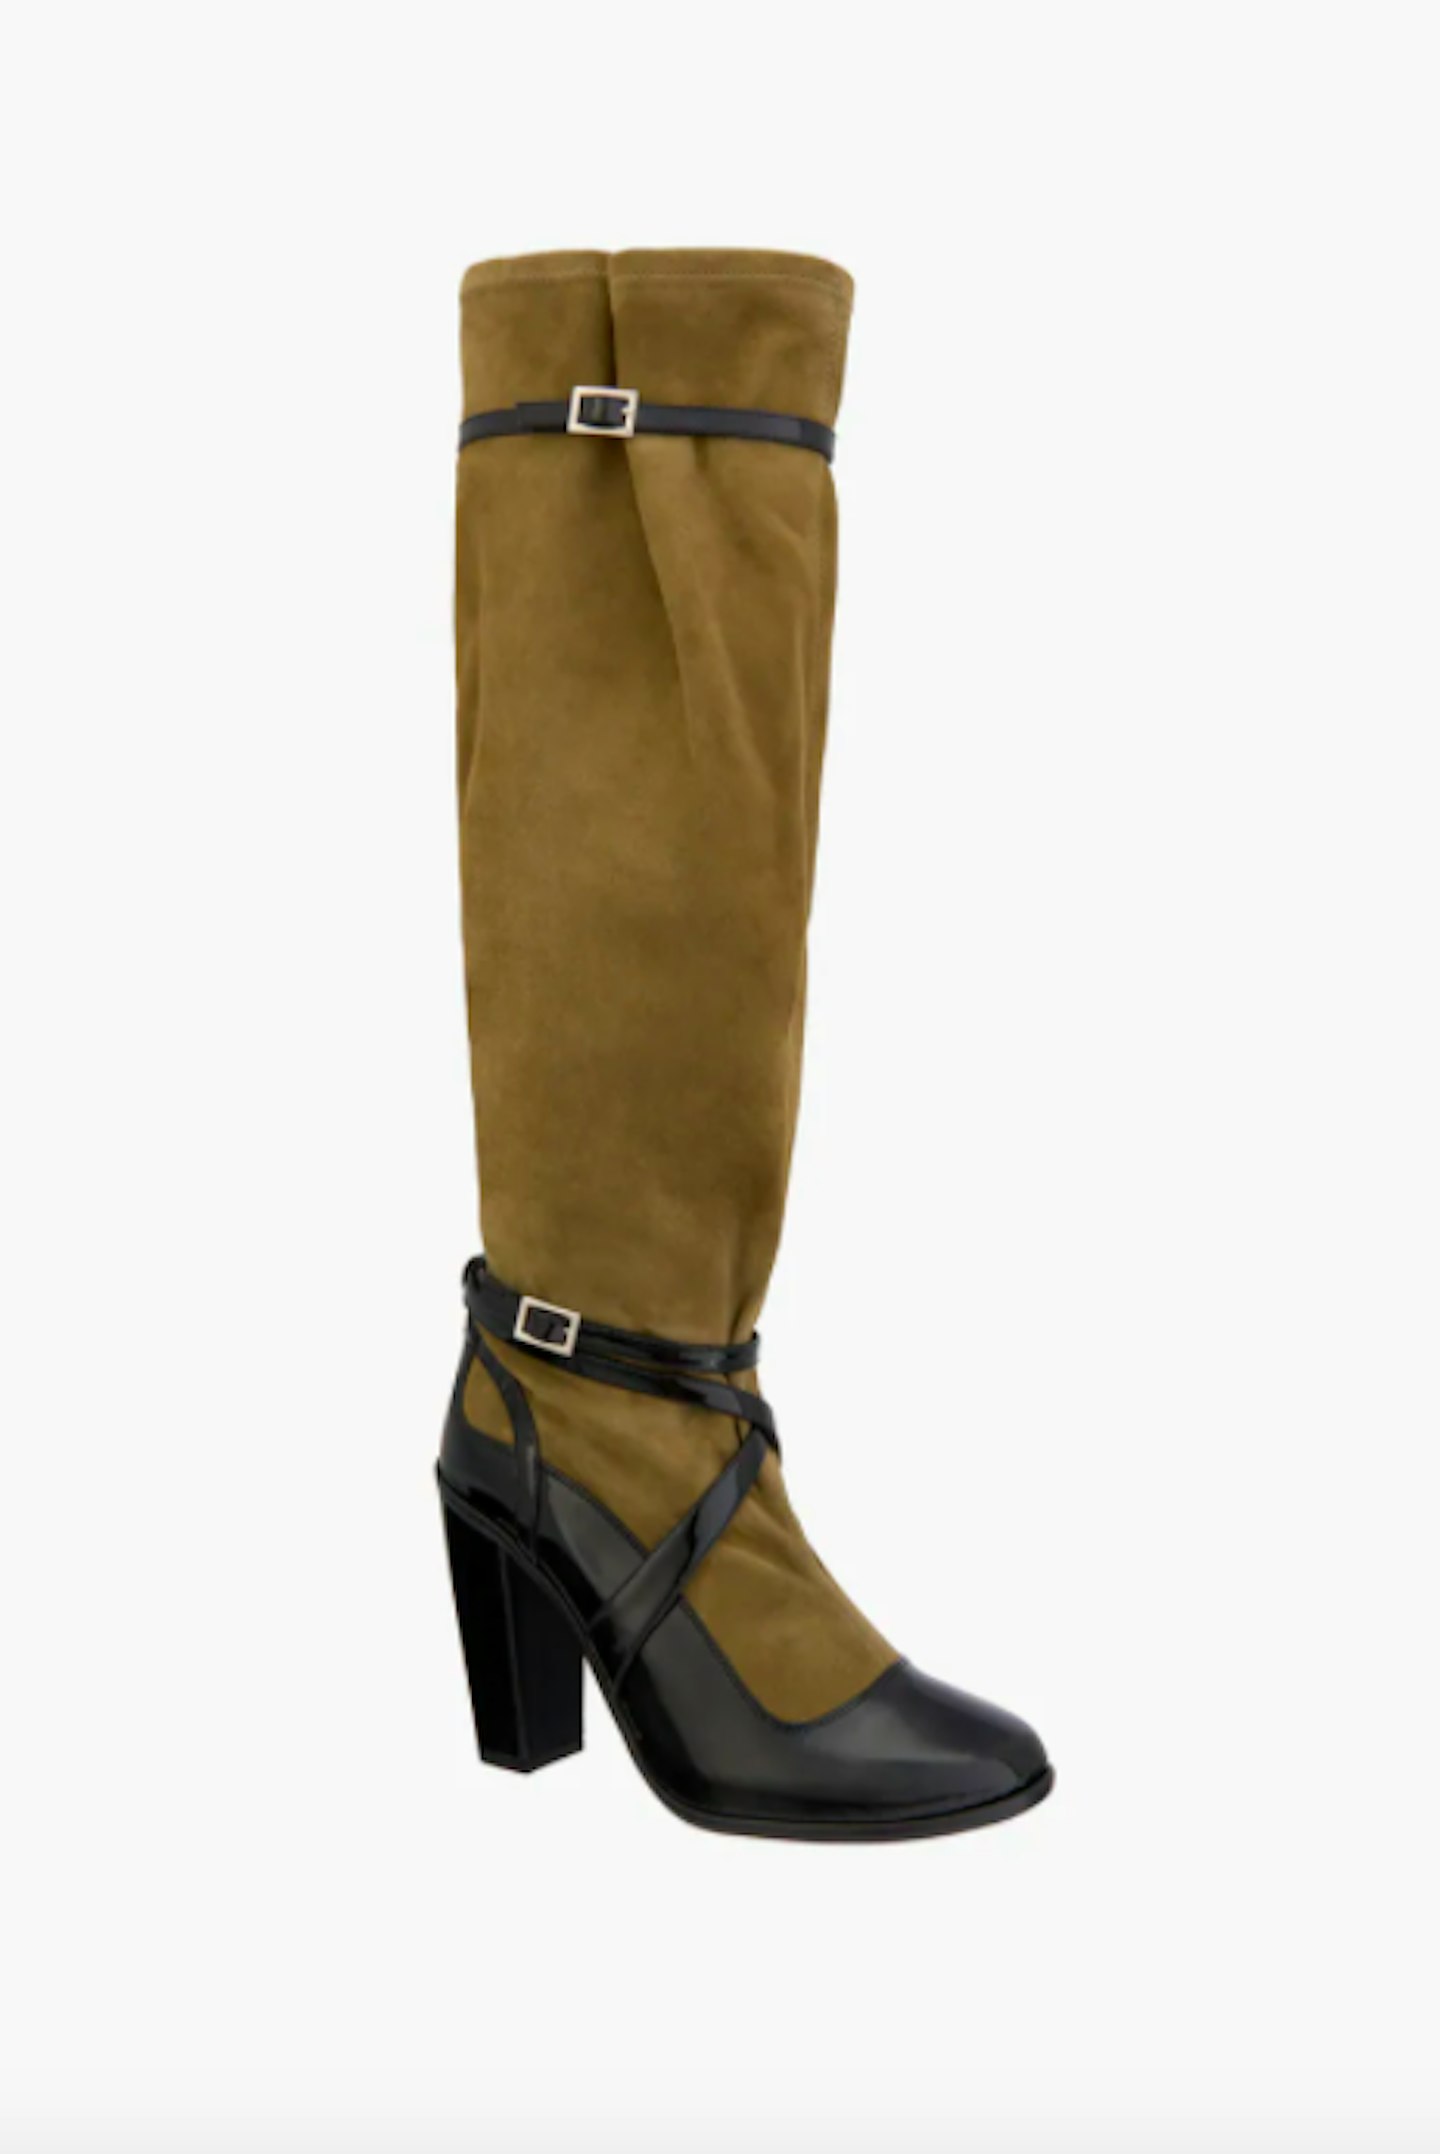 Limited Edition, Leather Knee-High Boots With Buckles, £219